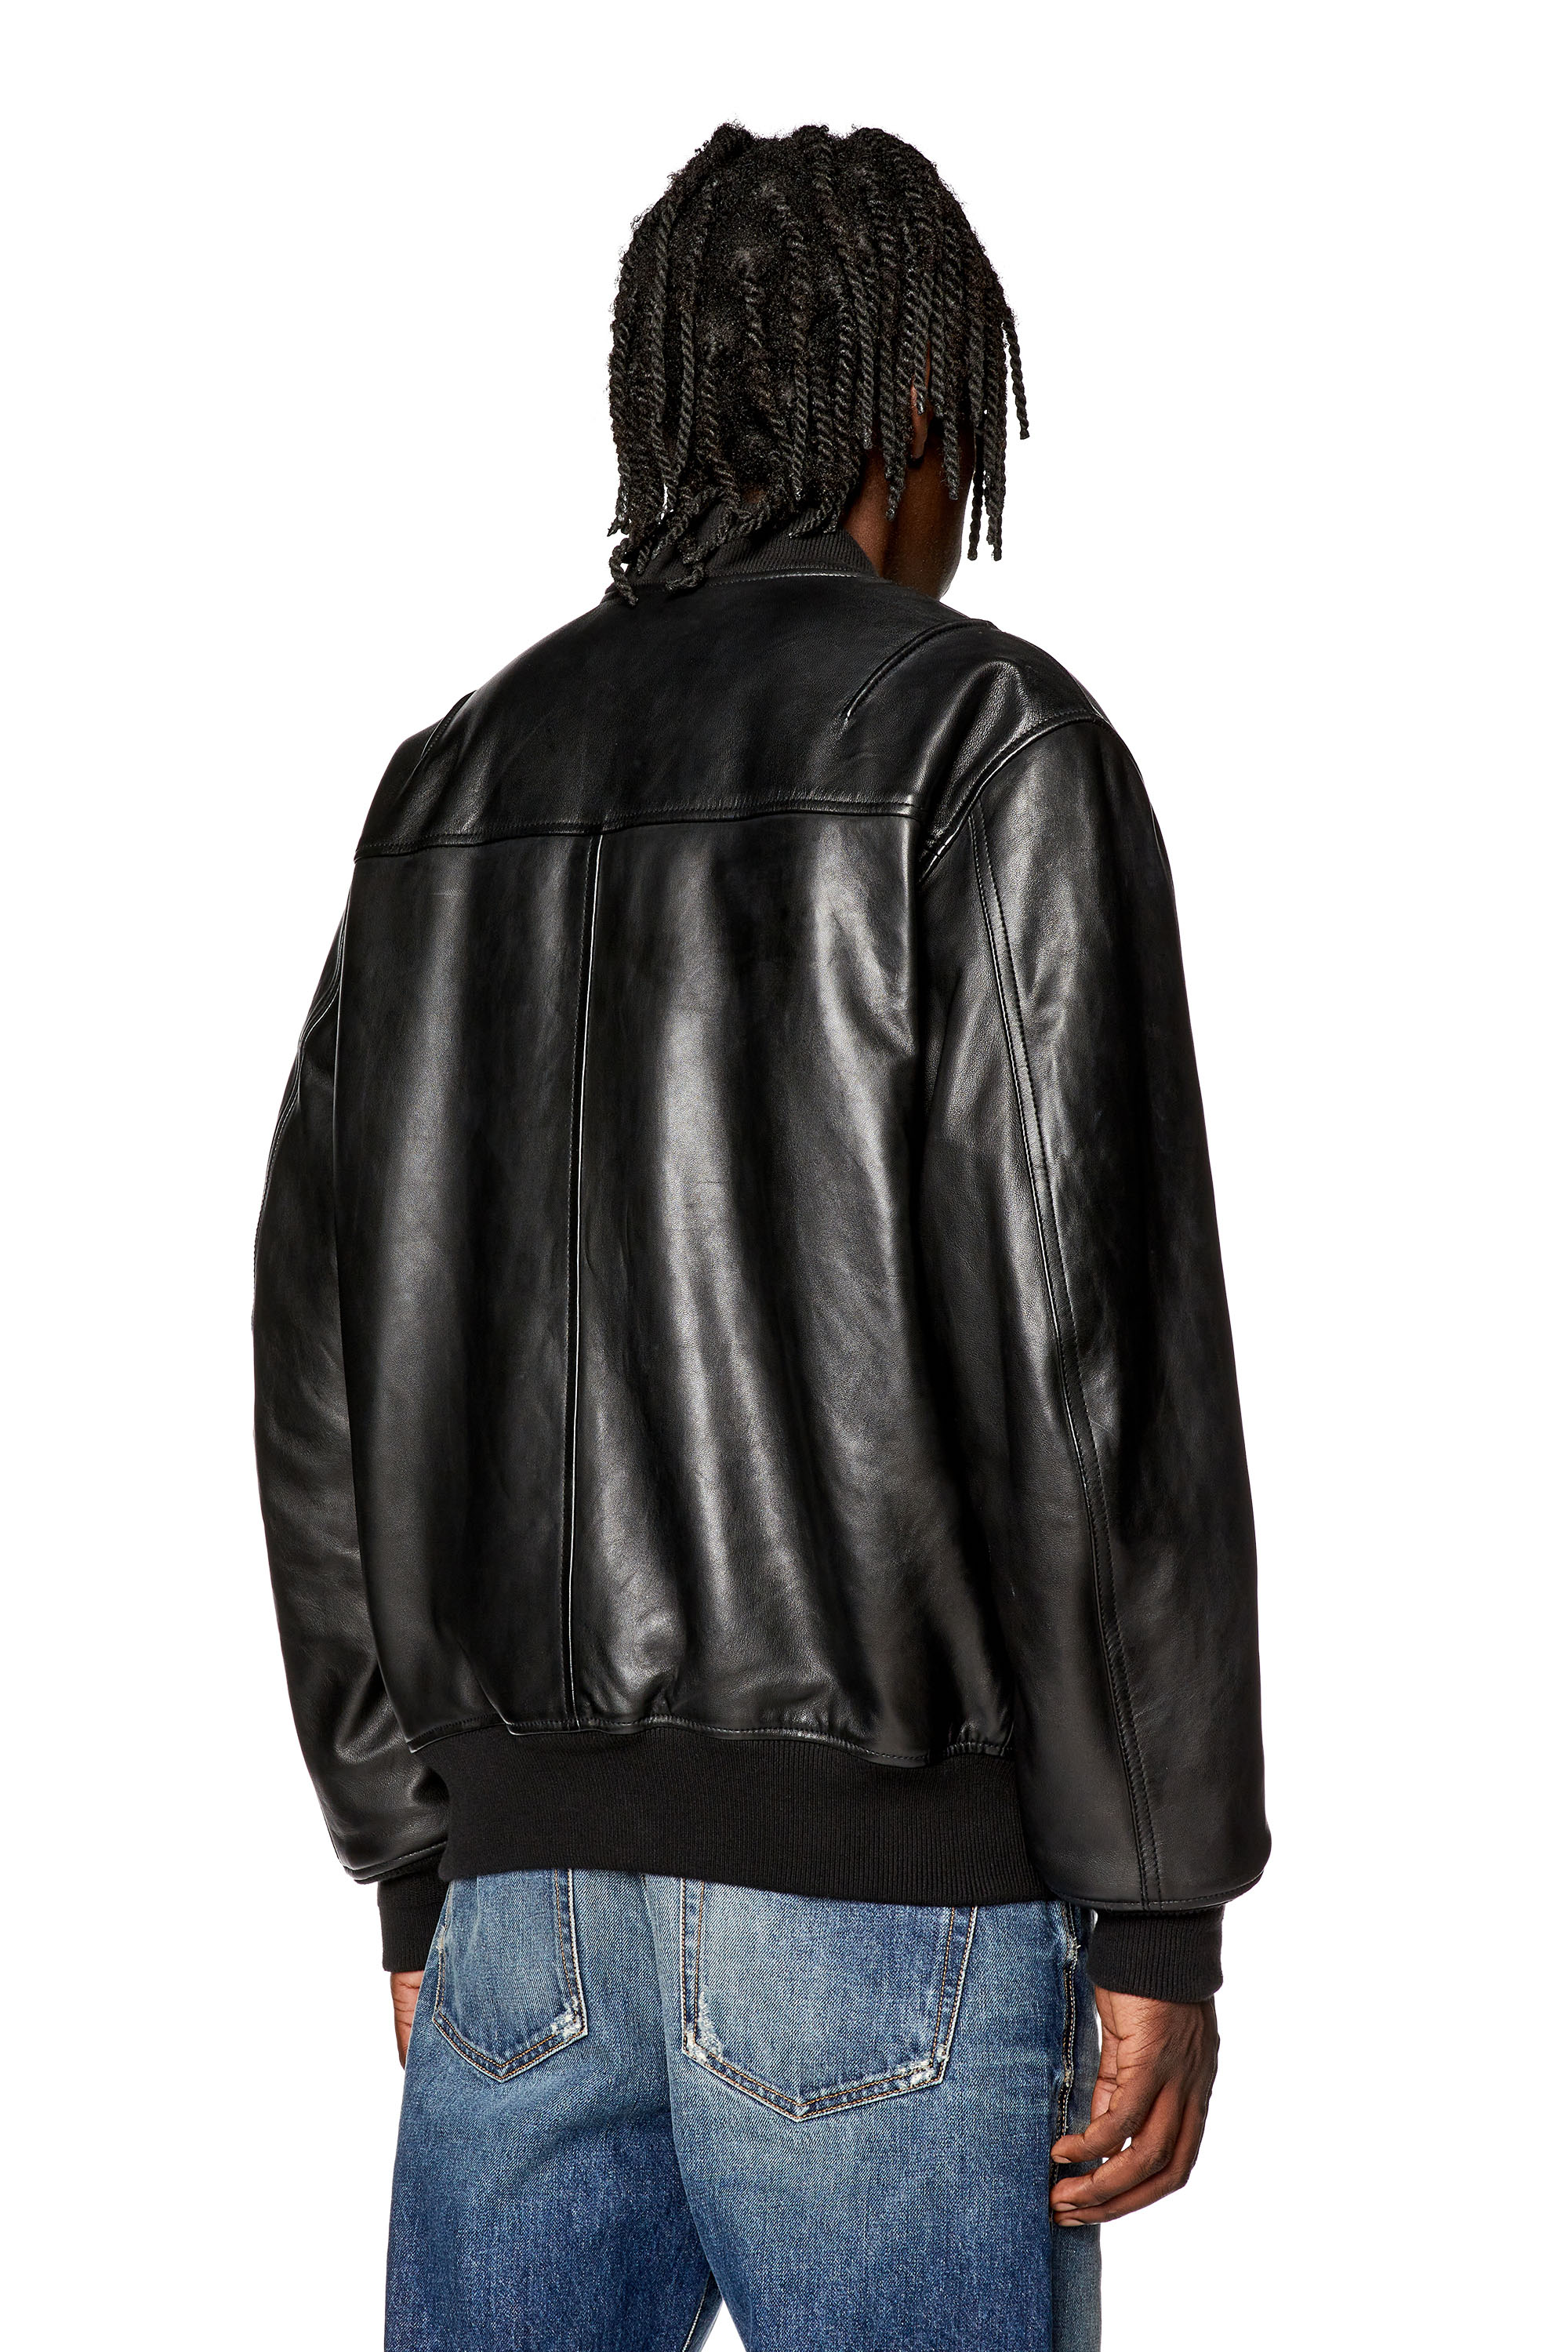 Men's Leather Jackets | Leather Company